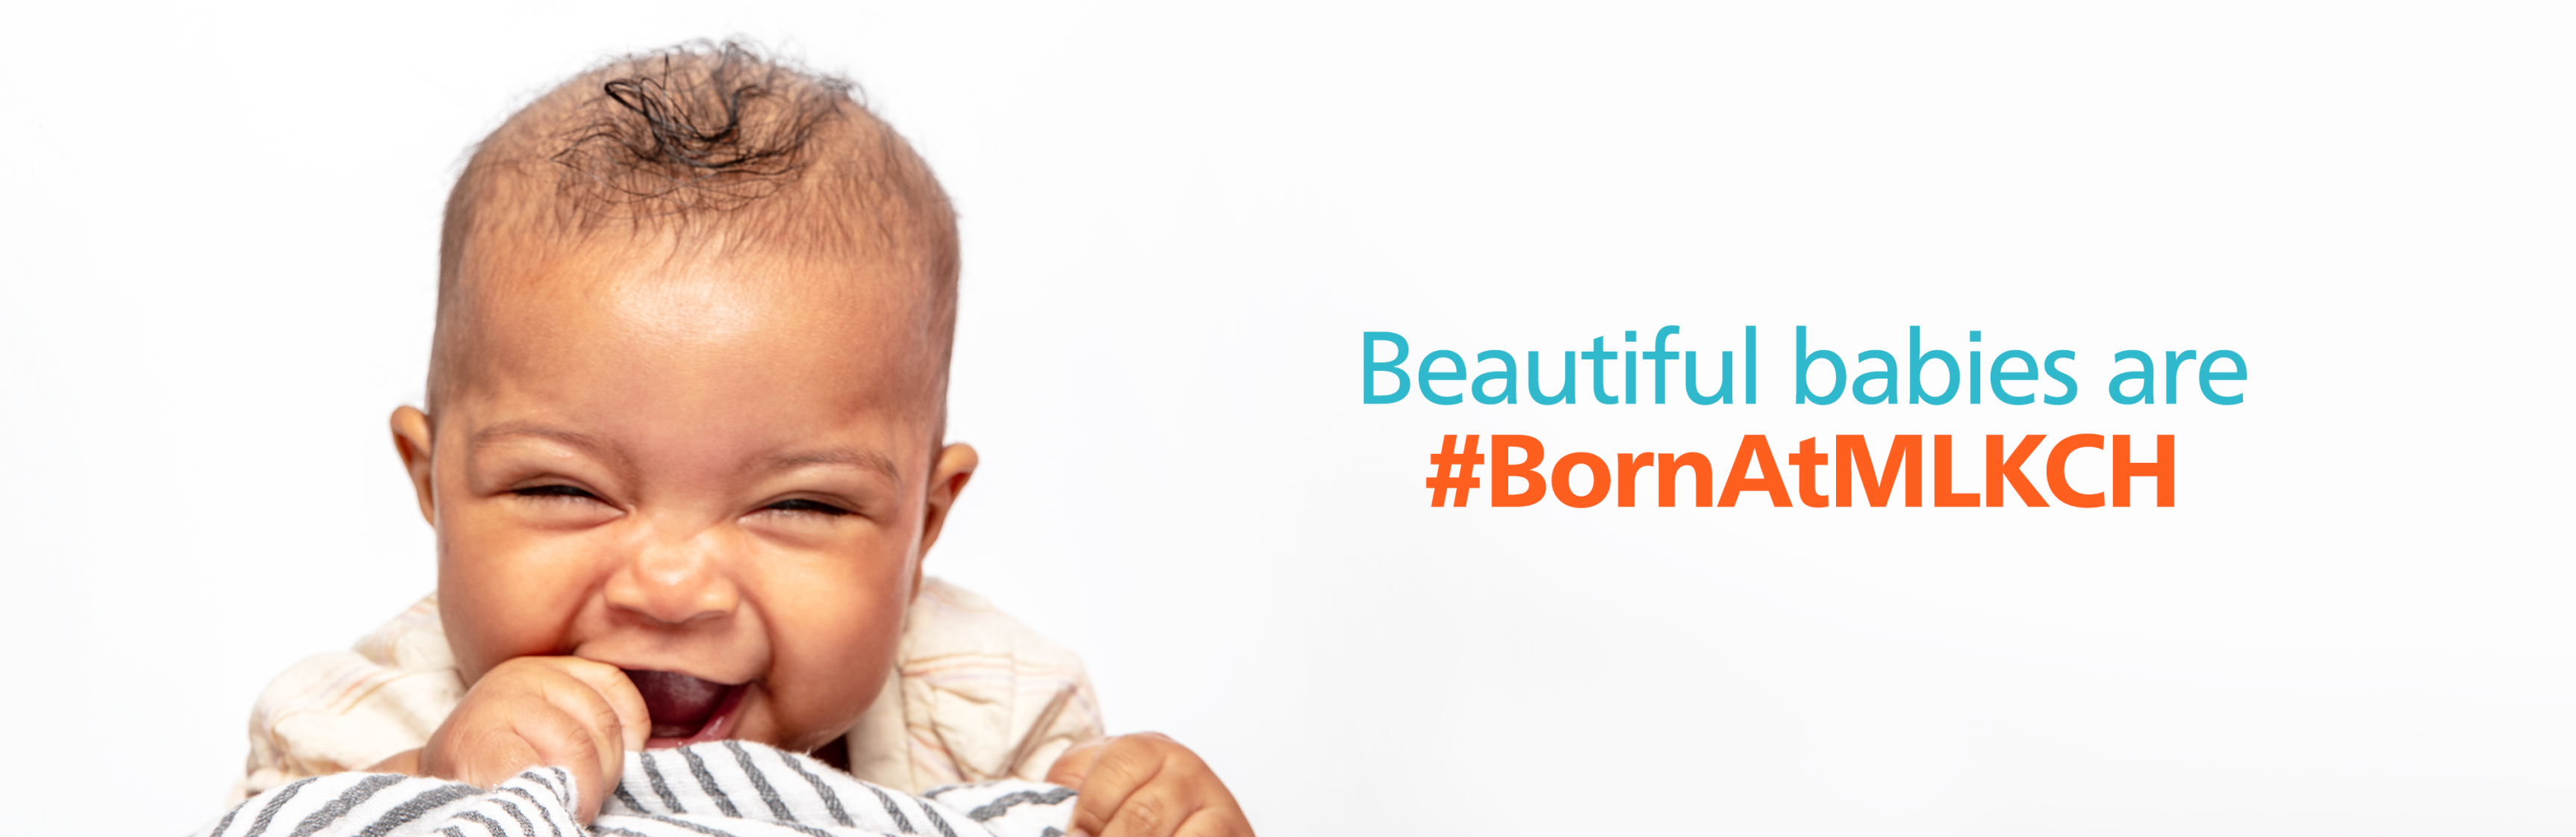 Photo of smiling AA baby girl with text: Beautiful Babies are #BornAtMLKCH